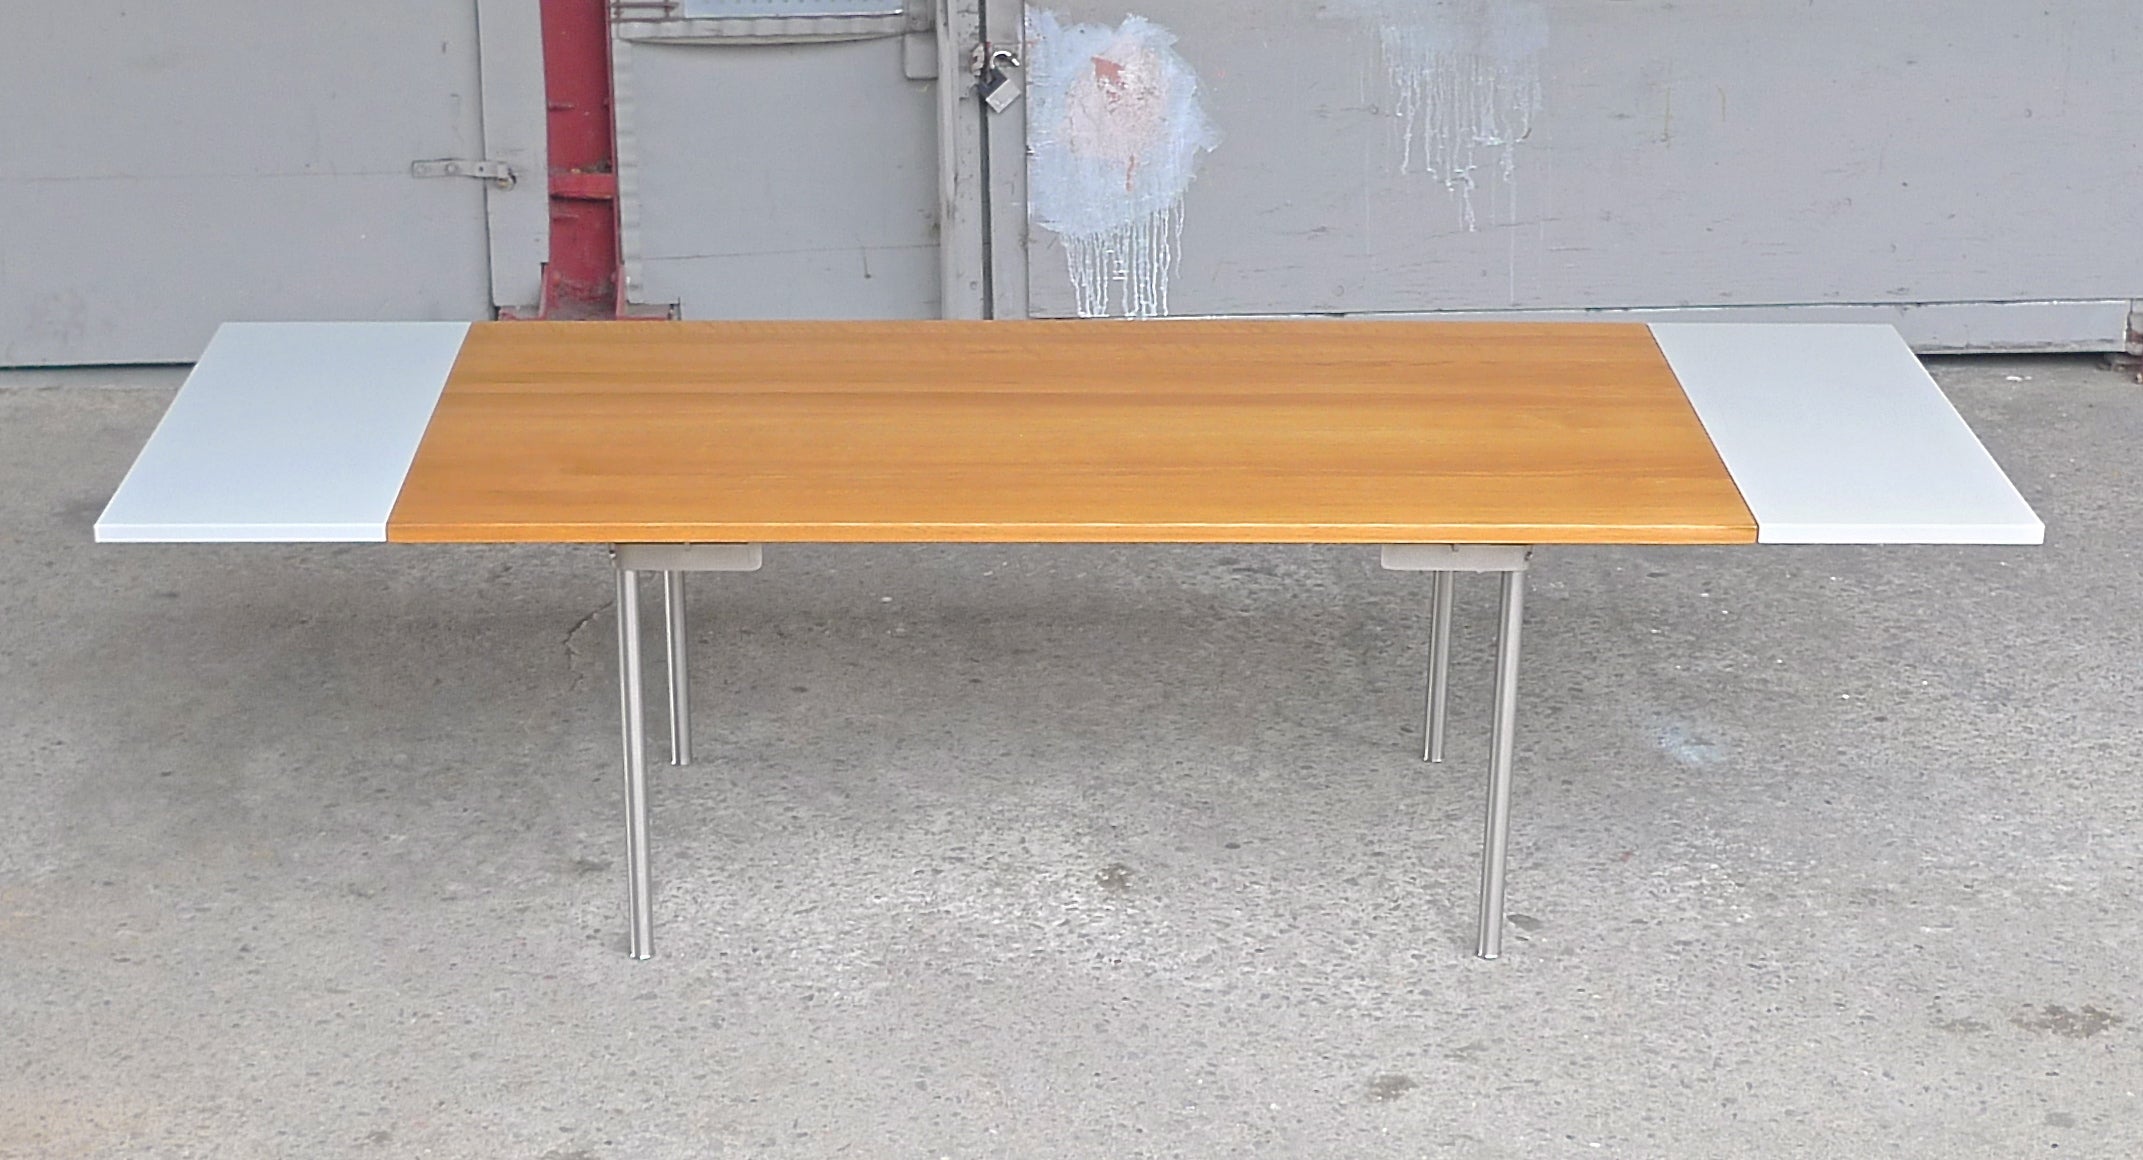 Wegner Danish-Modern CH318 Table for Carl Hansen with 2 Leaf Extensions For Sale